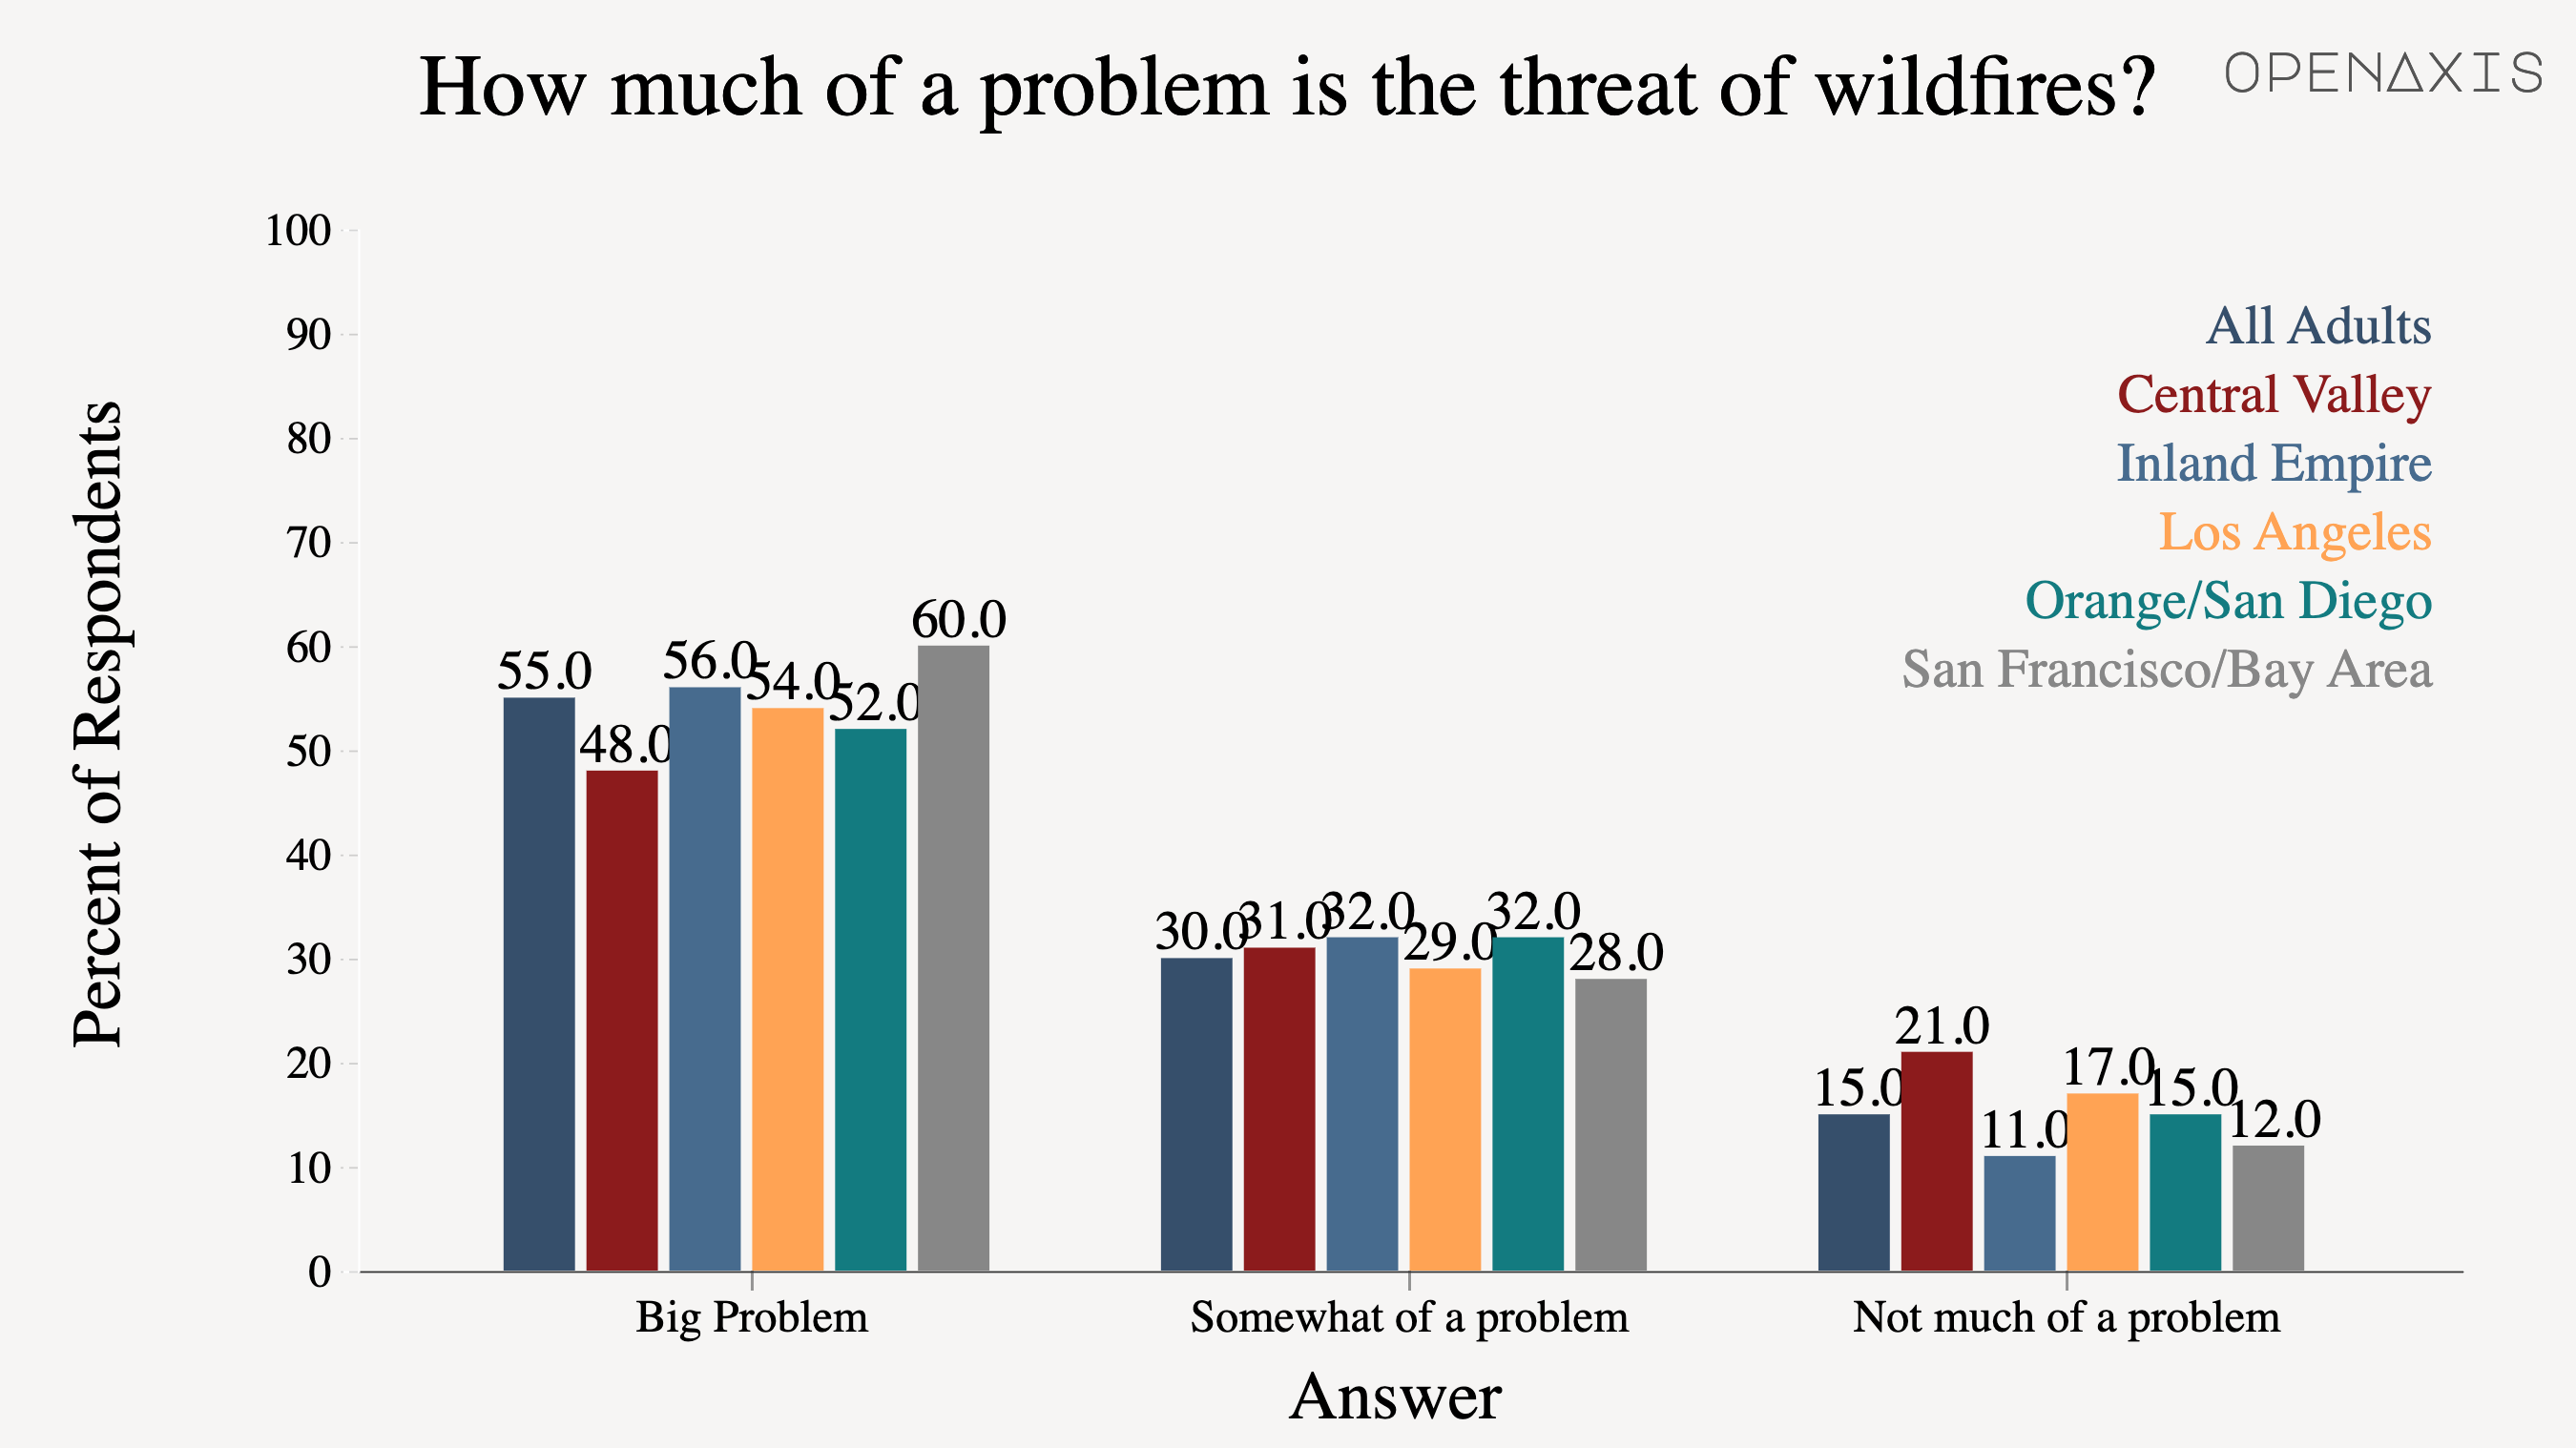 "How much of a problem is the threat of wildfires?"